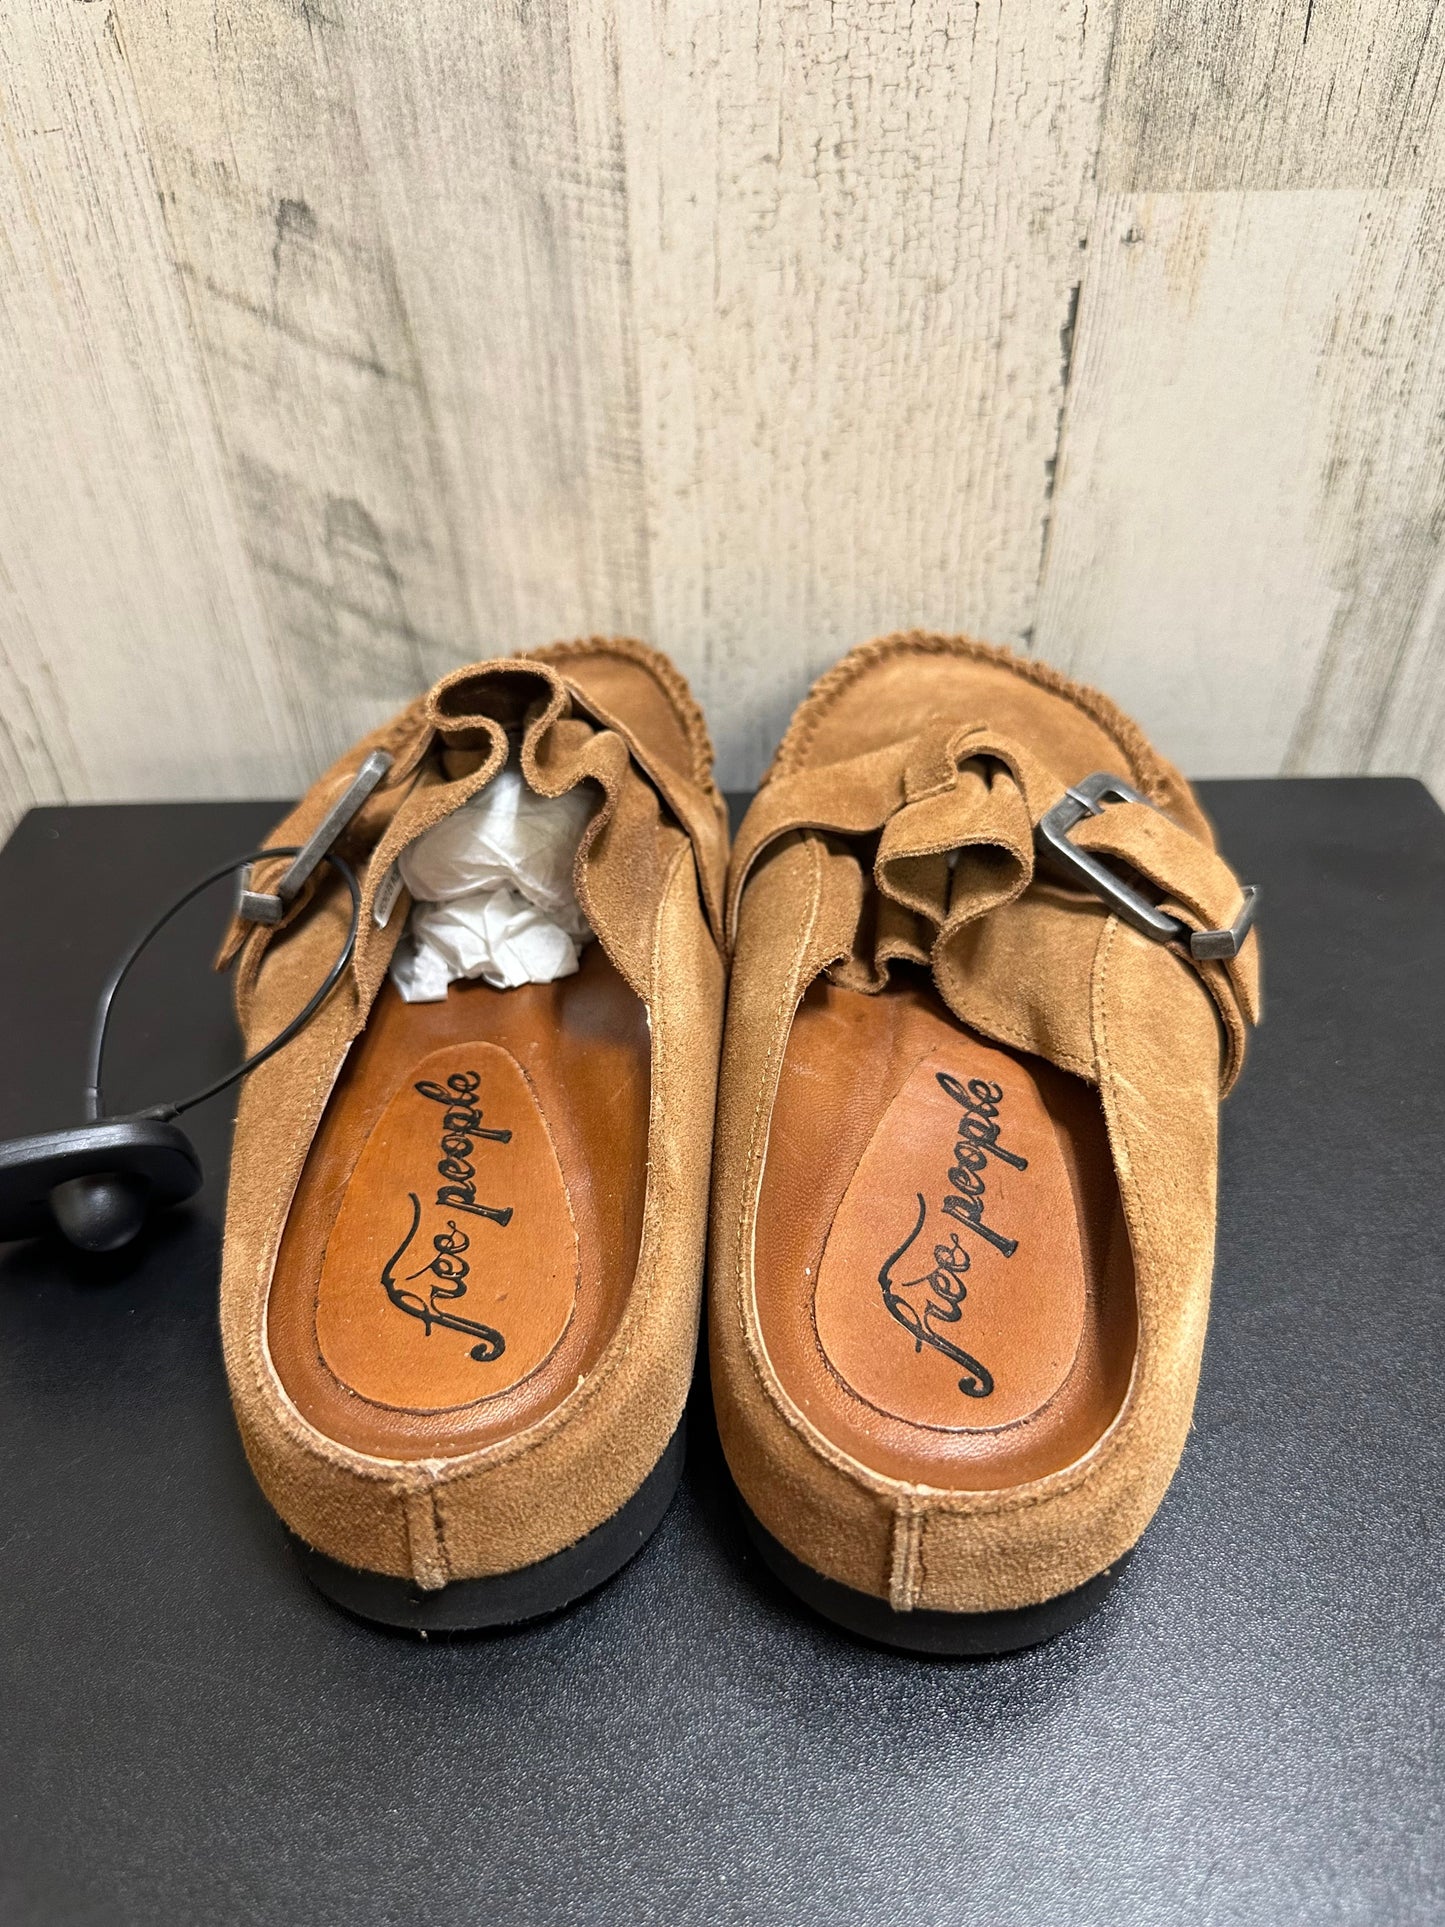 Brown Shoes Flats Free People, Size 6.5